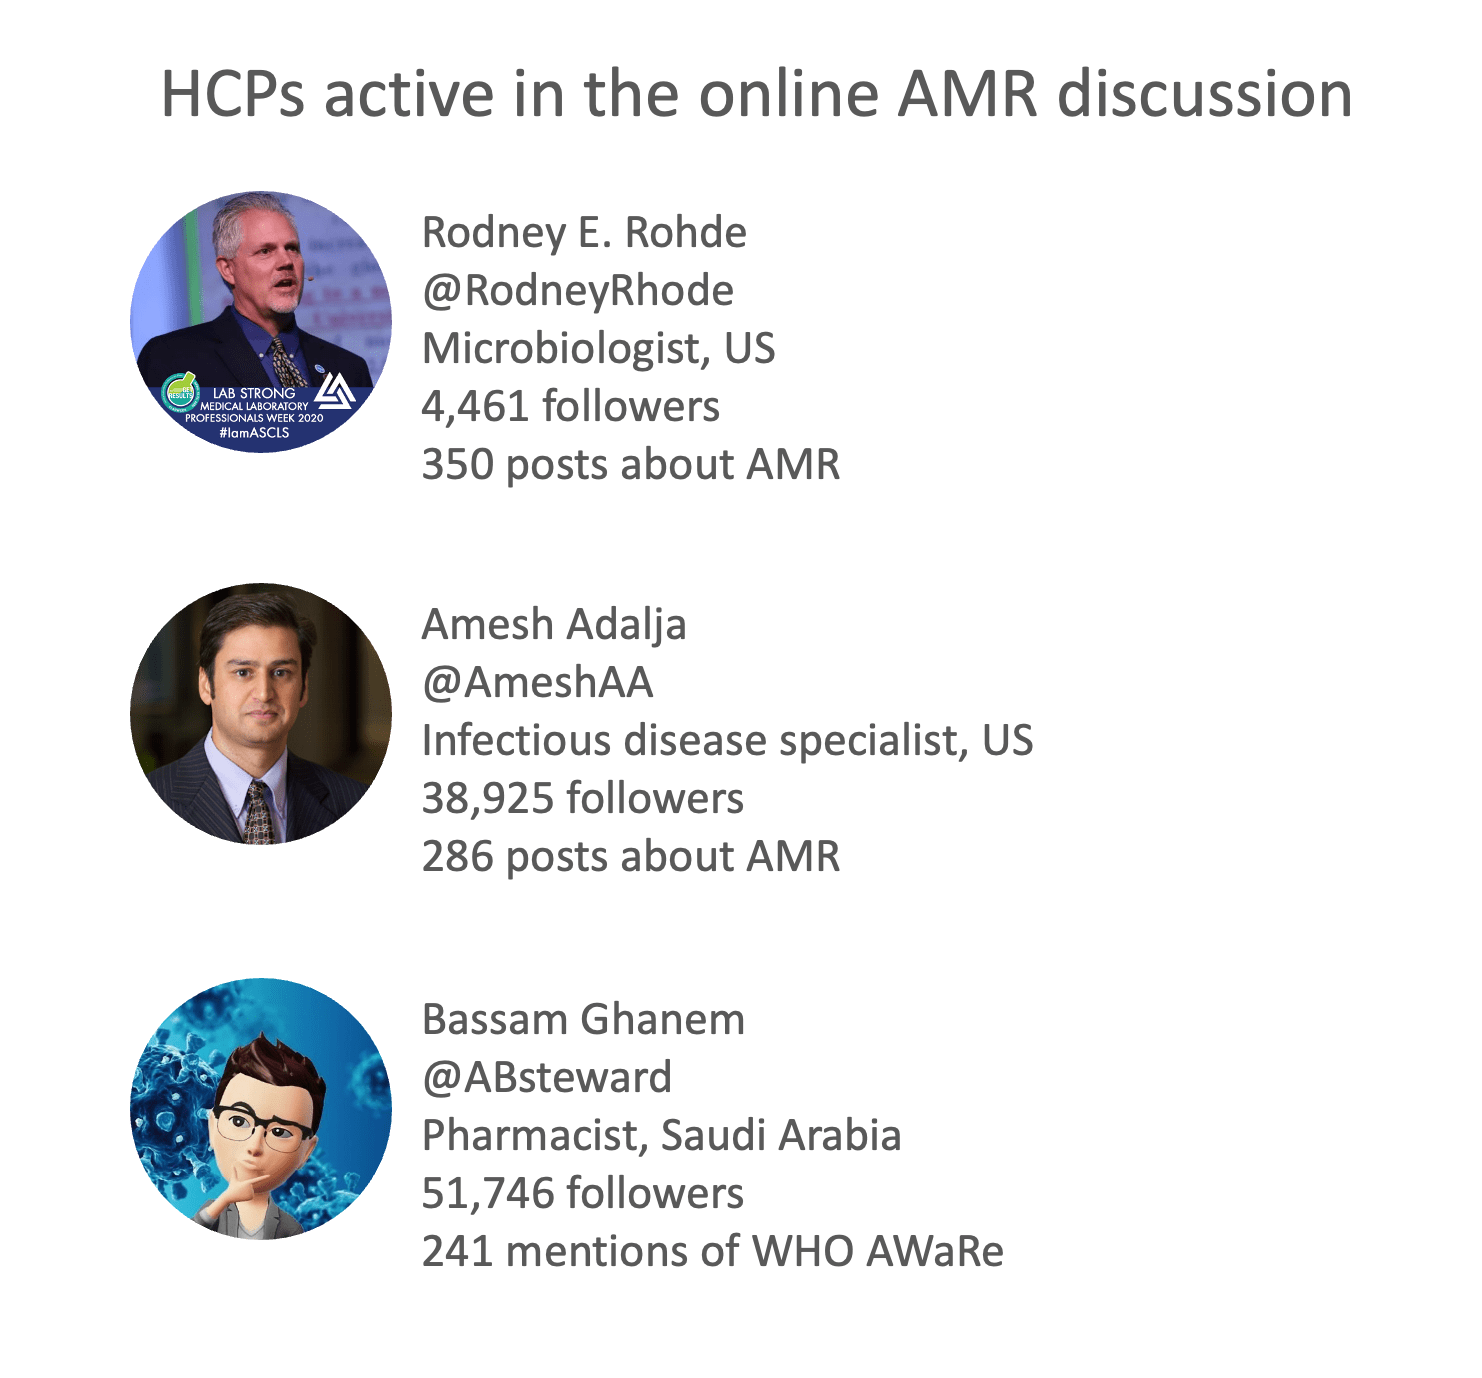 Three HCPs who are active in the online AMR discussion